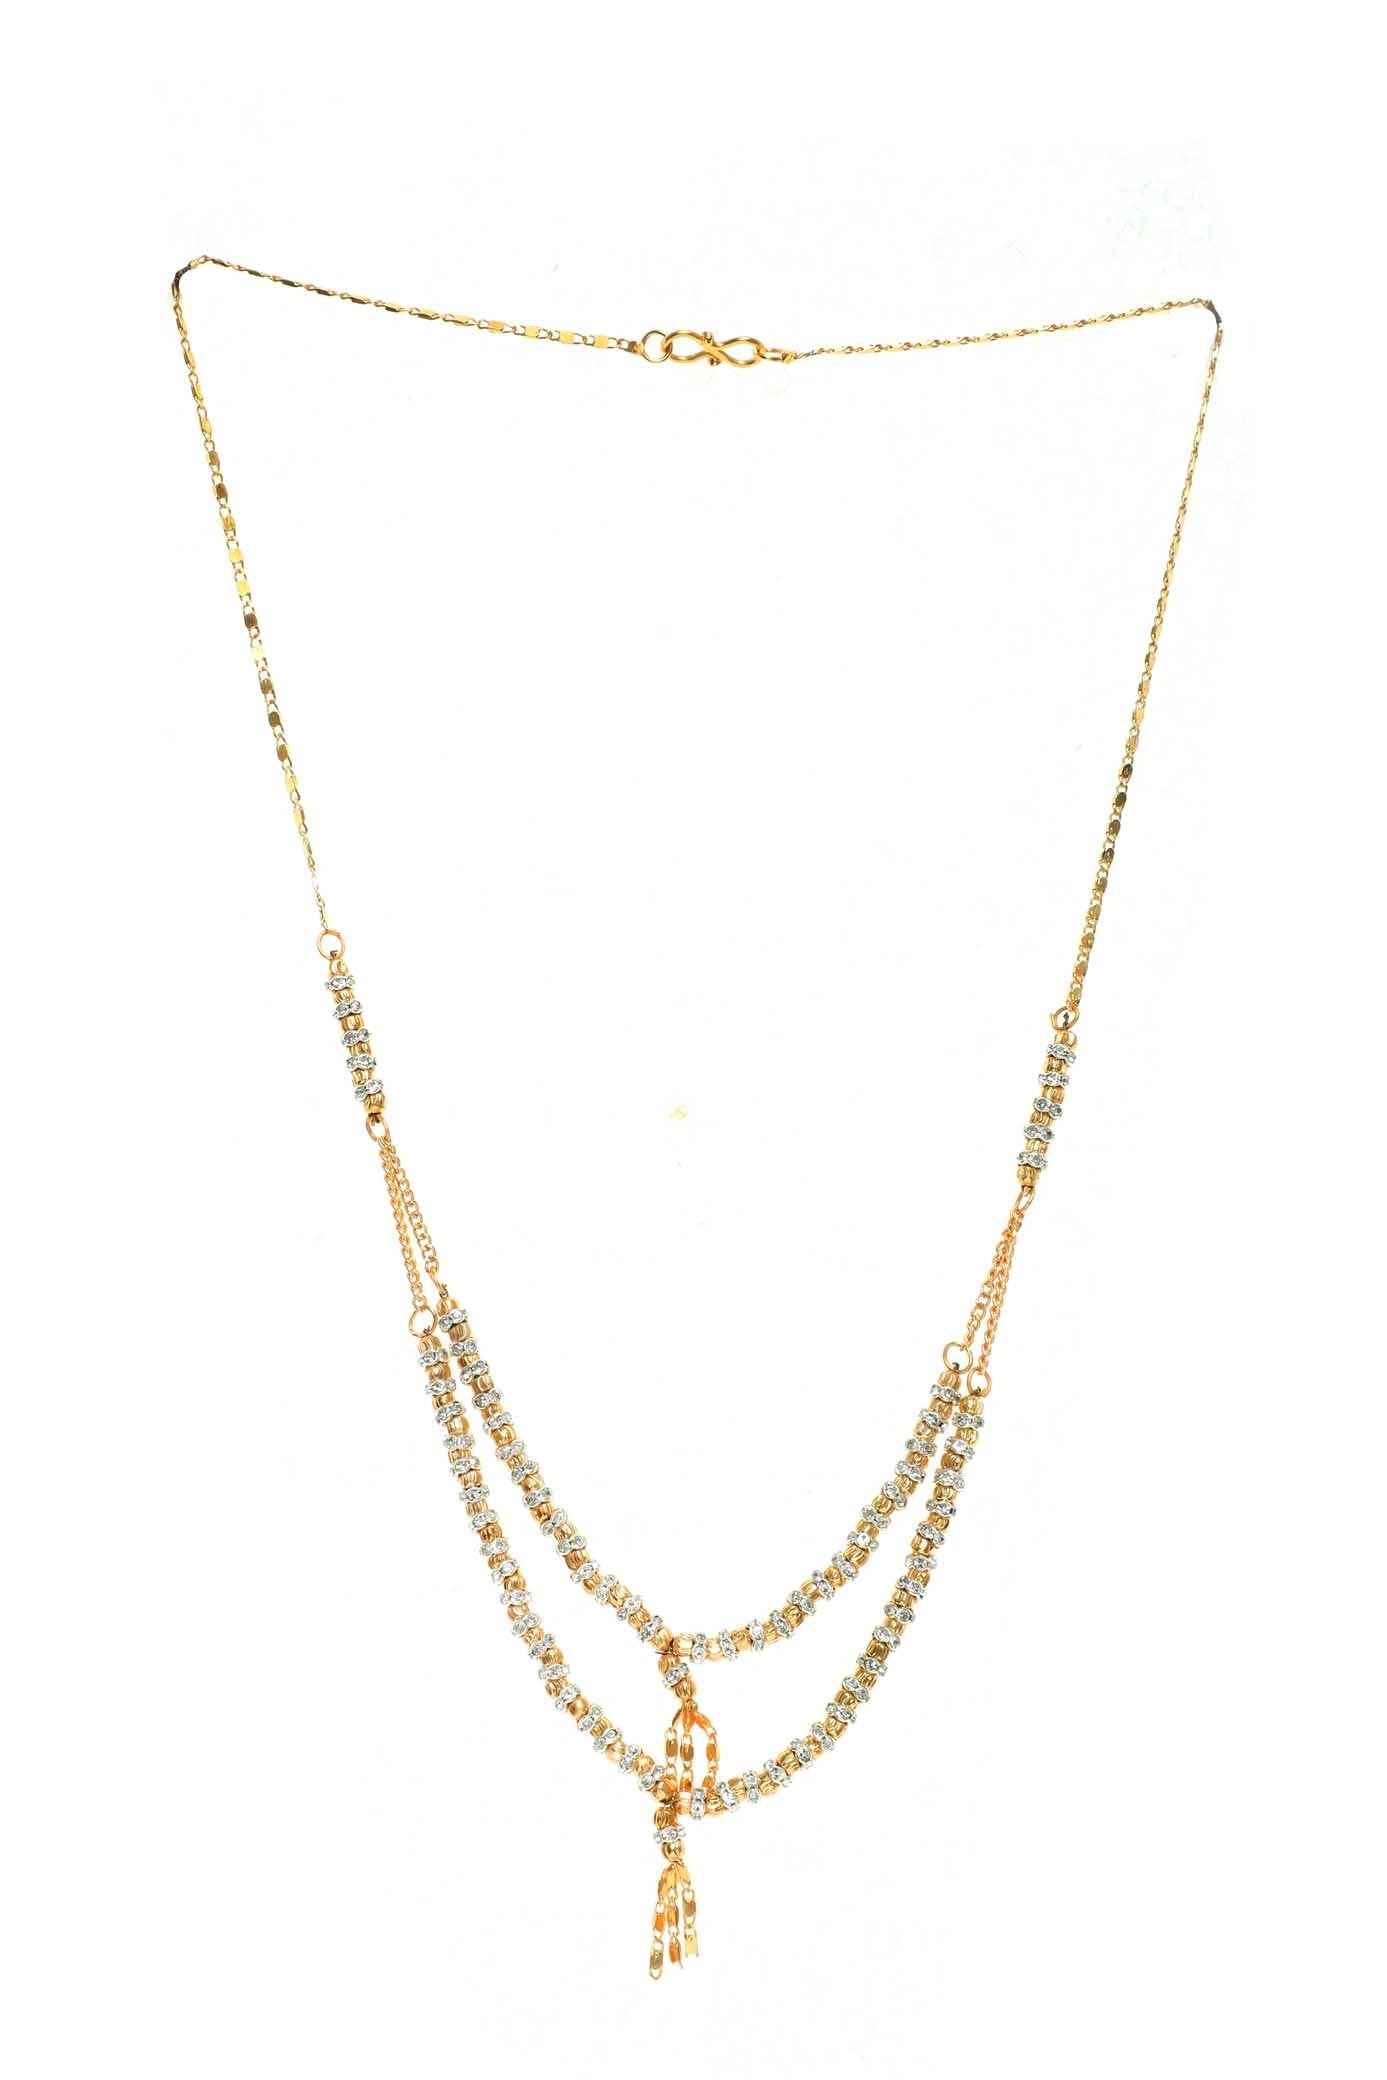 Indian Jewellery from Meira Jewellery:Chain Necklace,Trendy Golden Chain Necklace MJ-DOK-HD-DLSG